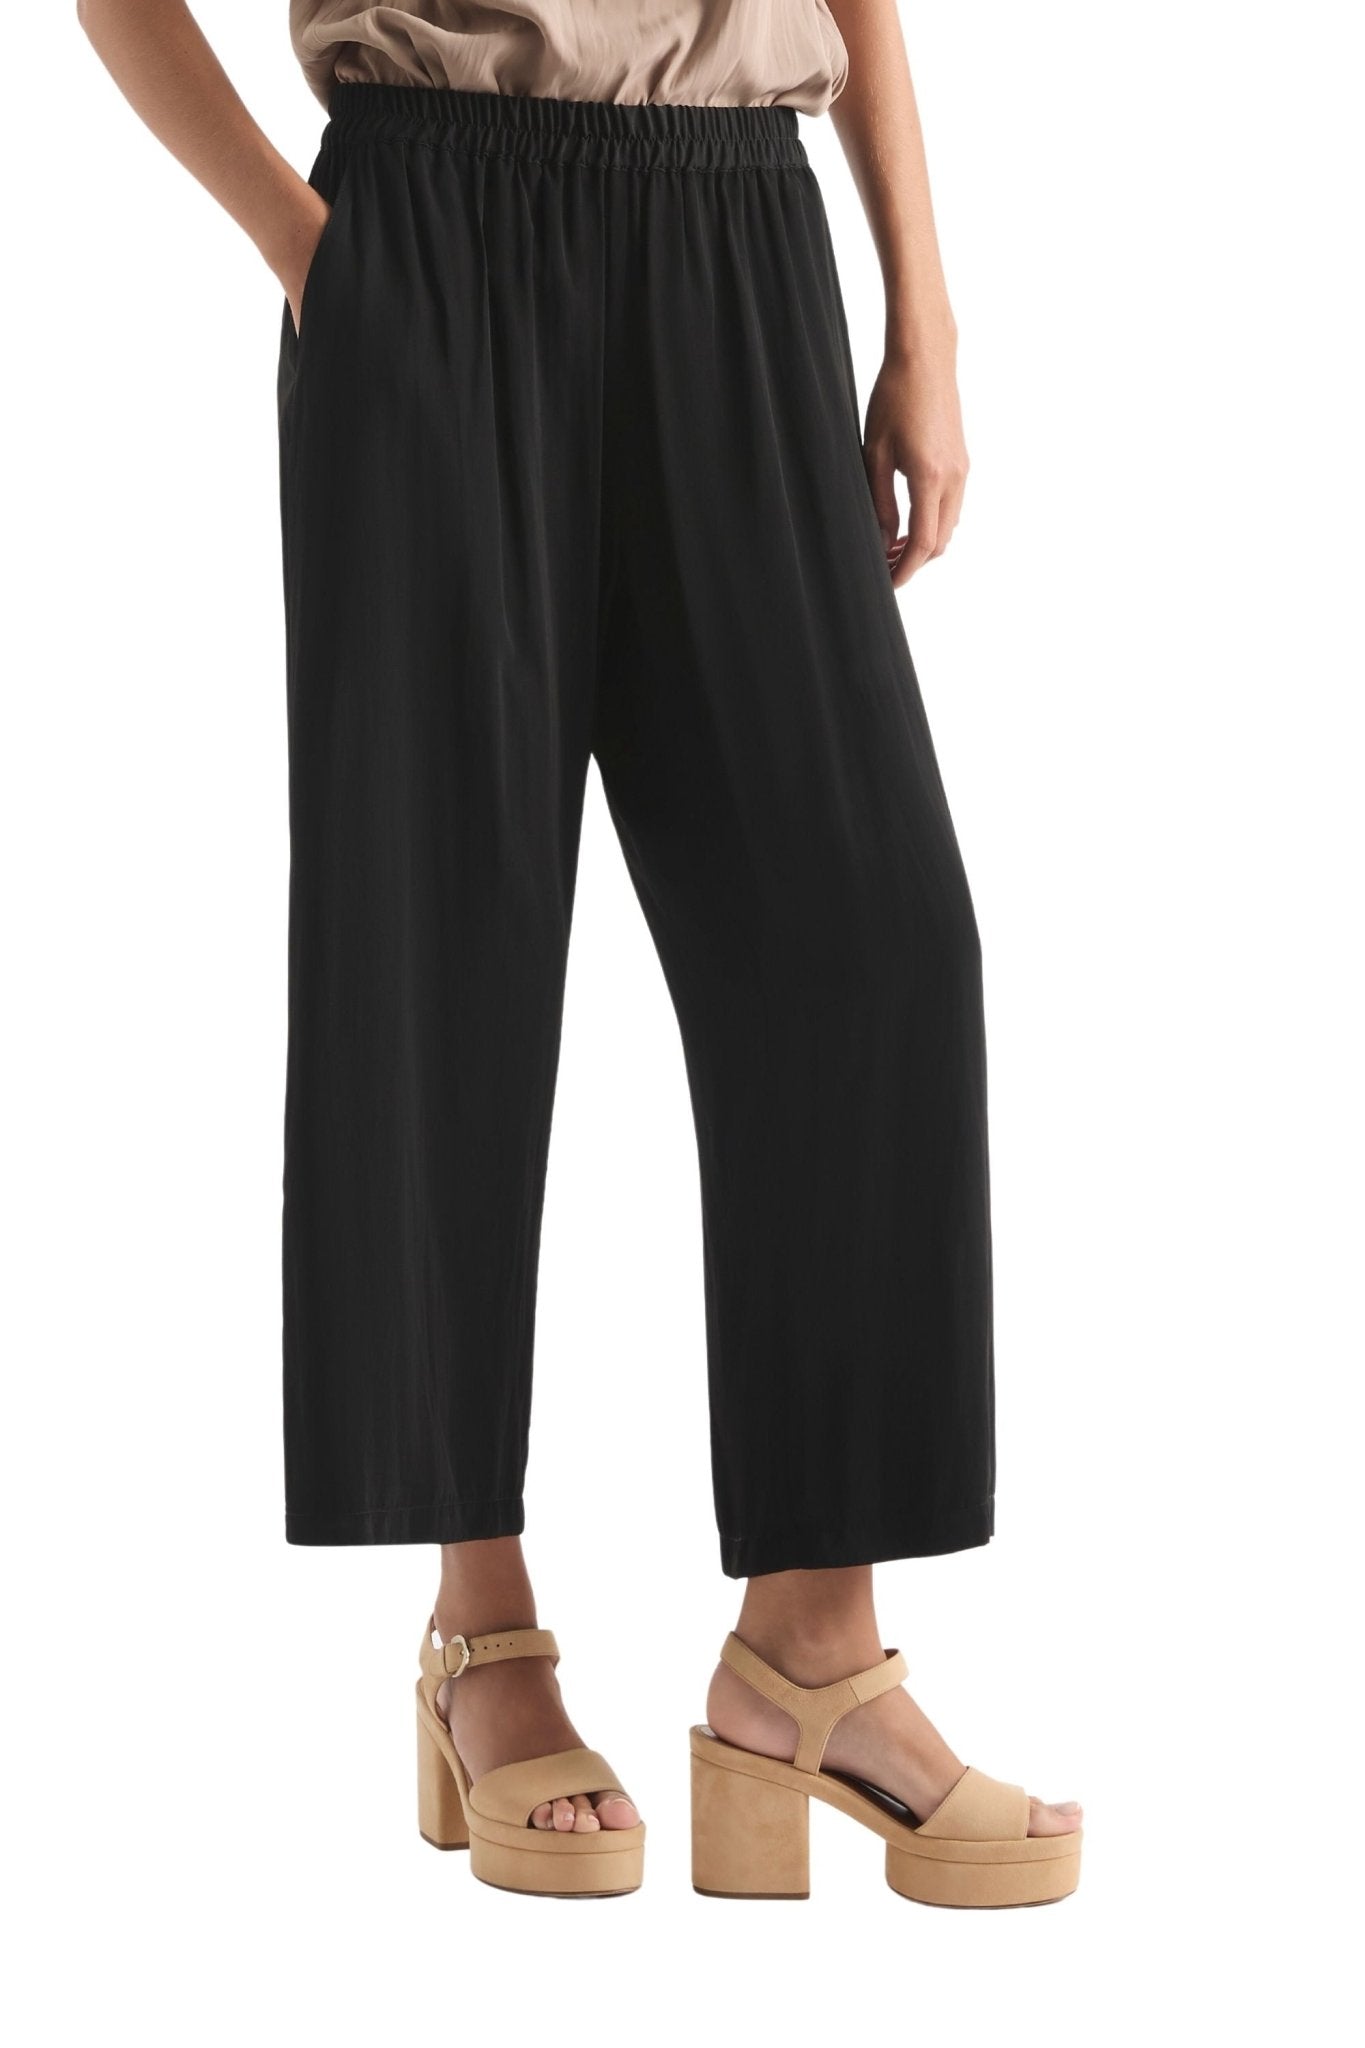 PACE PANT - F671740